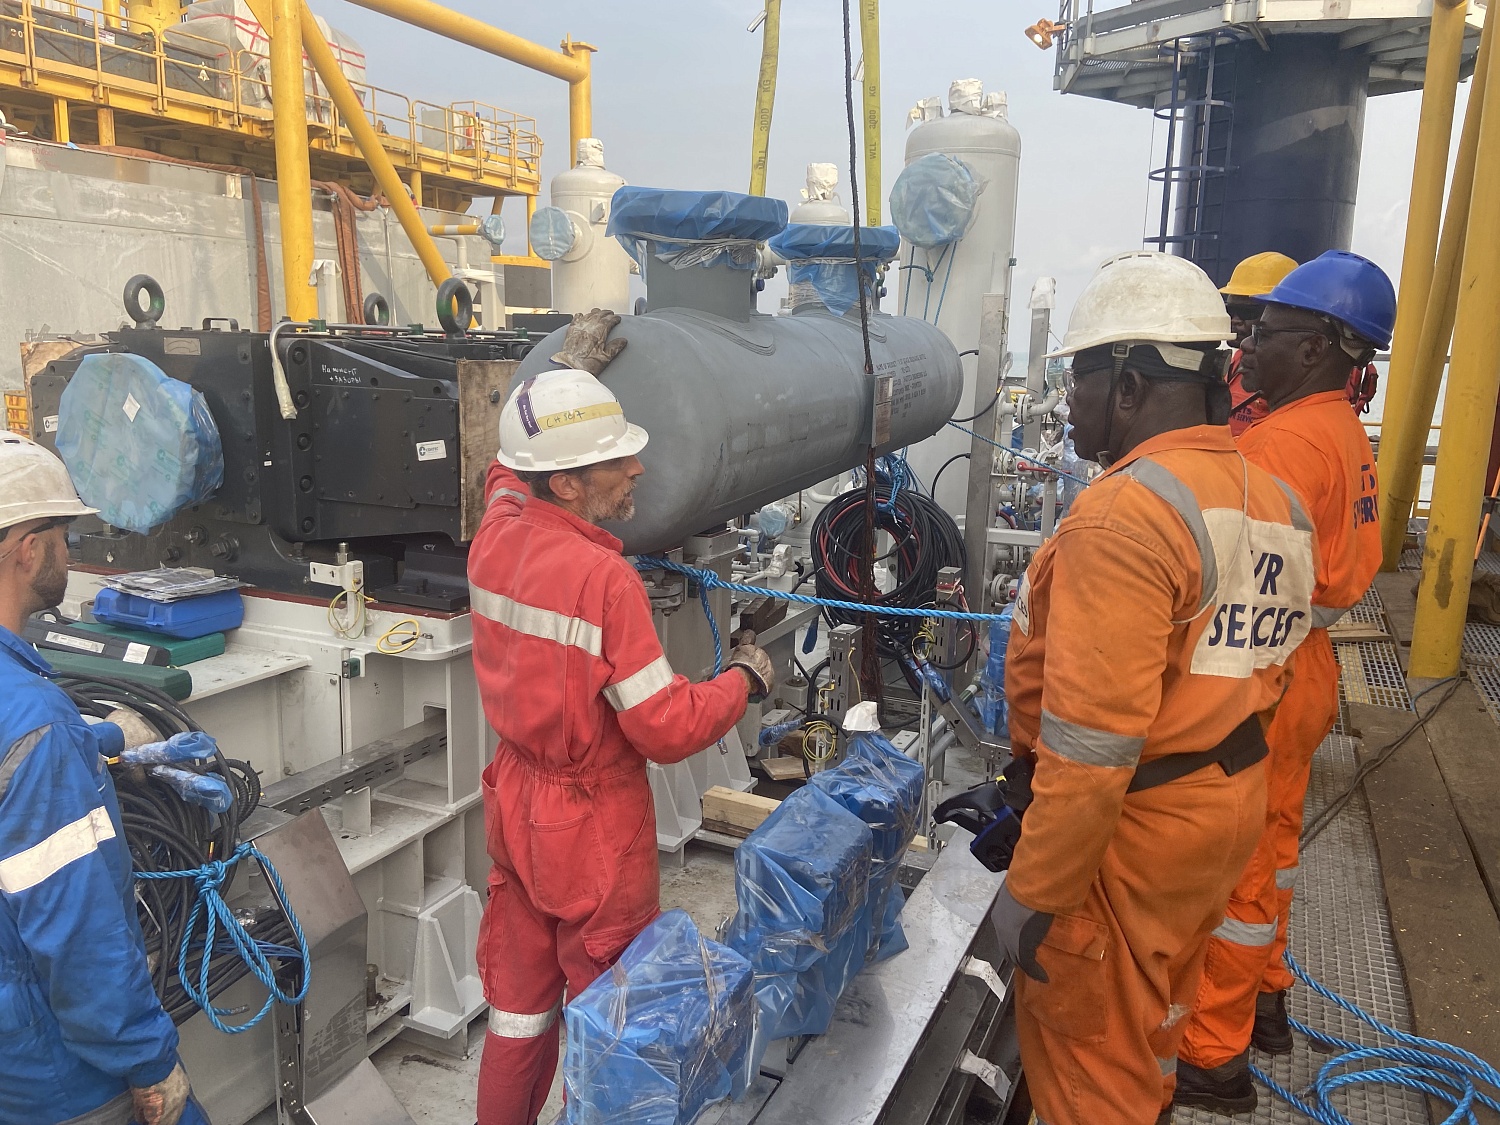 Specialists of INGC Service Department Have Performed Installation Supervision Work at the Facility in the Republic of Cameroon